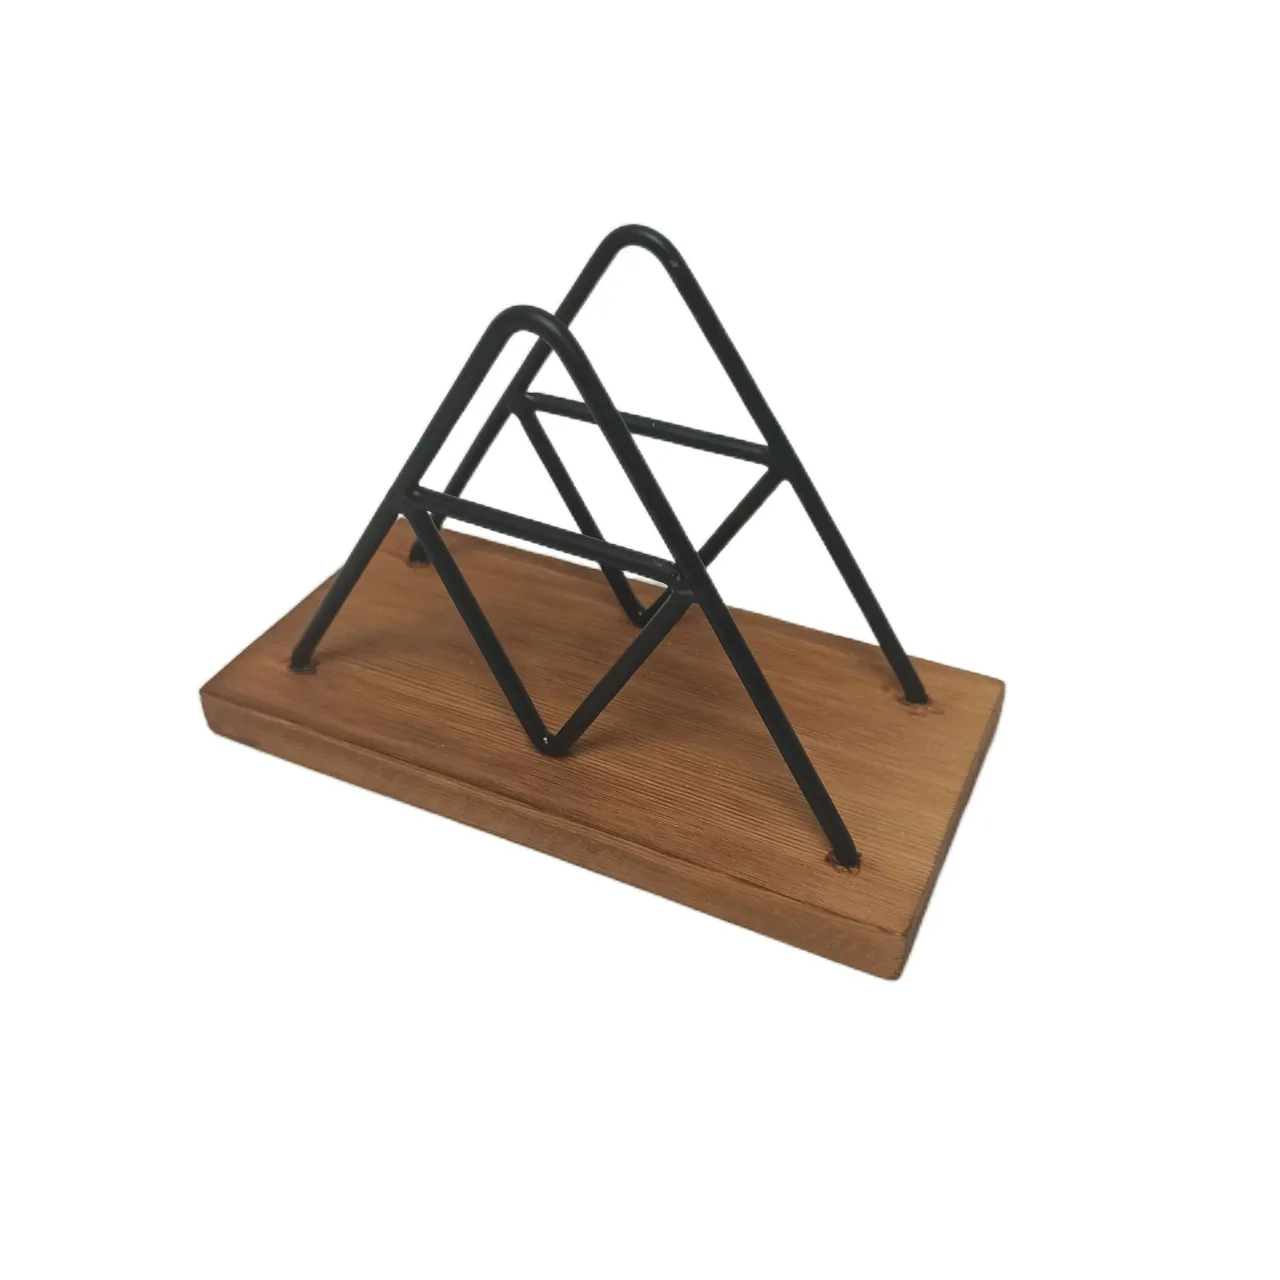 Rustic triangle napkin holder for table